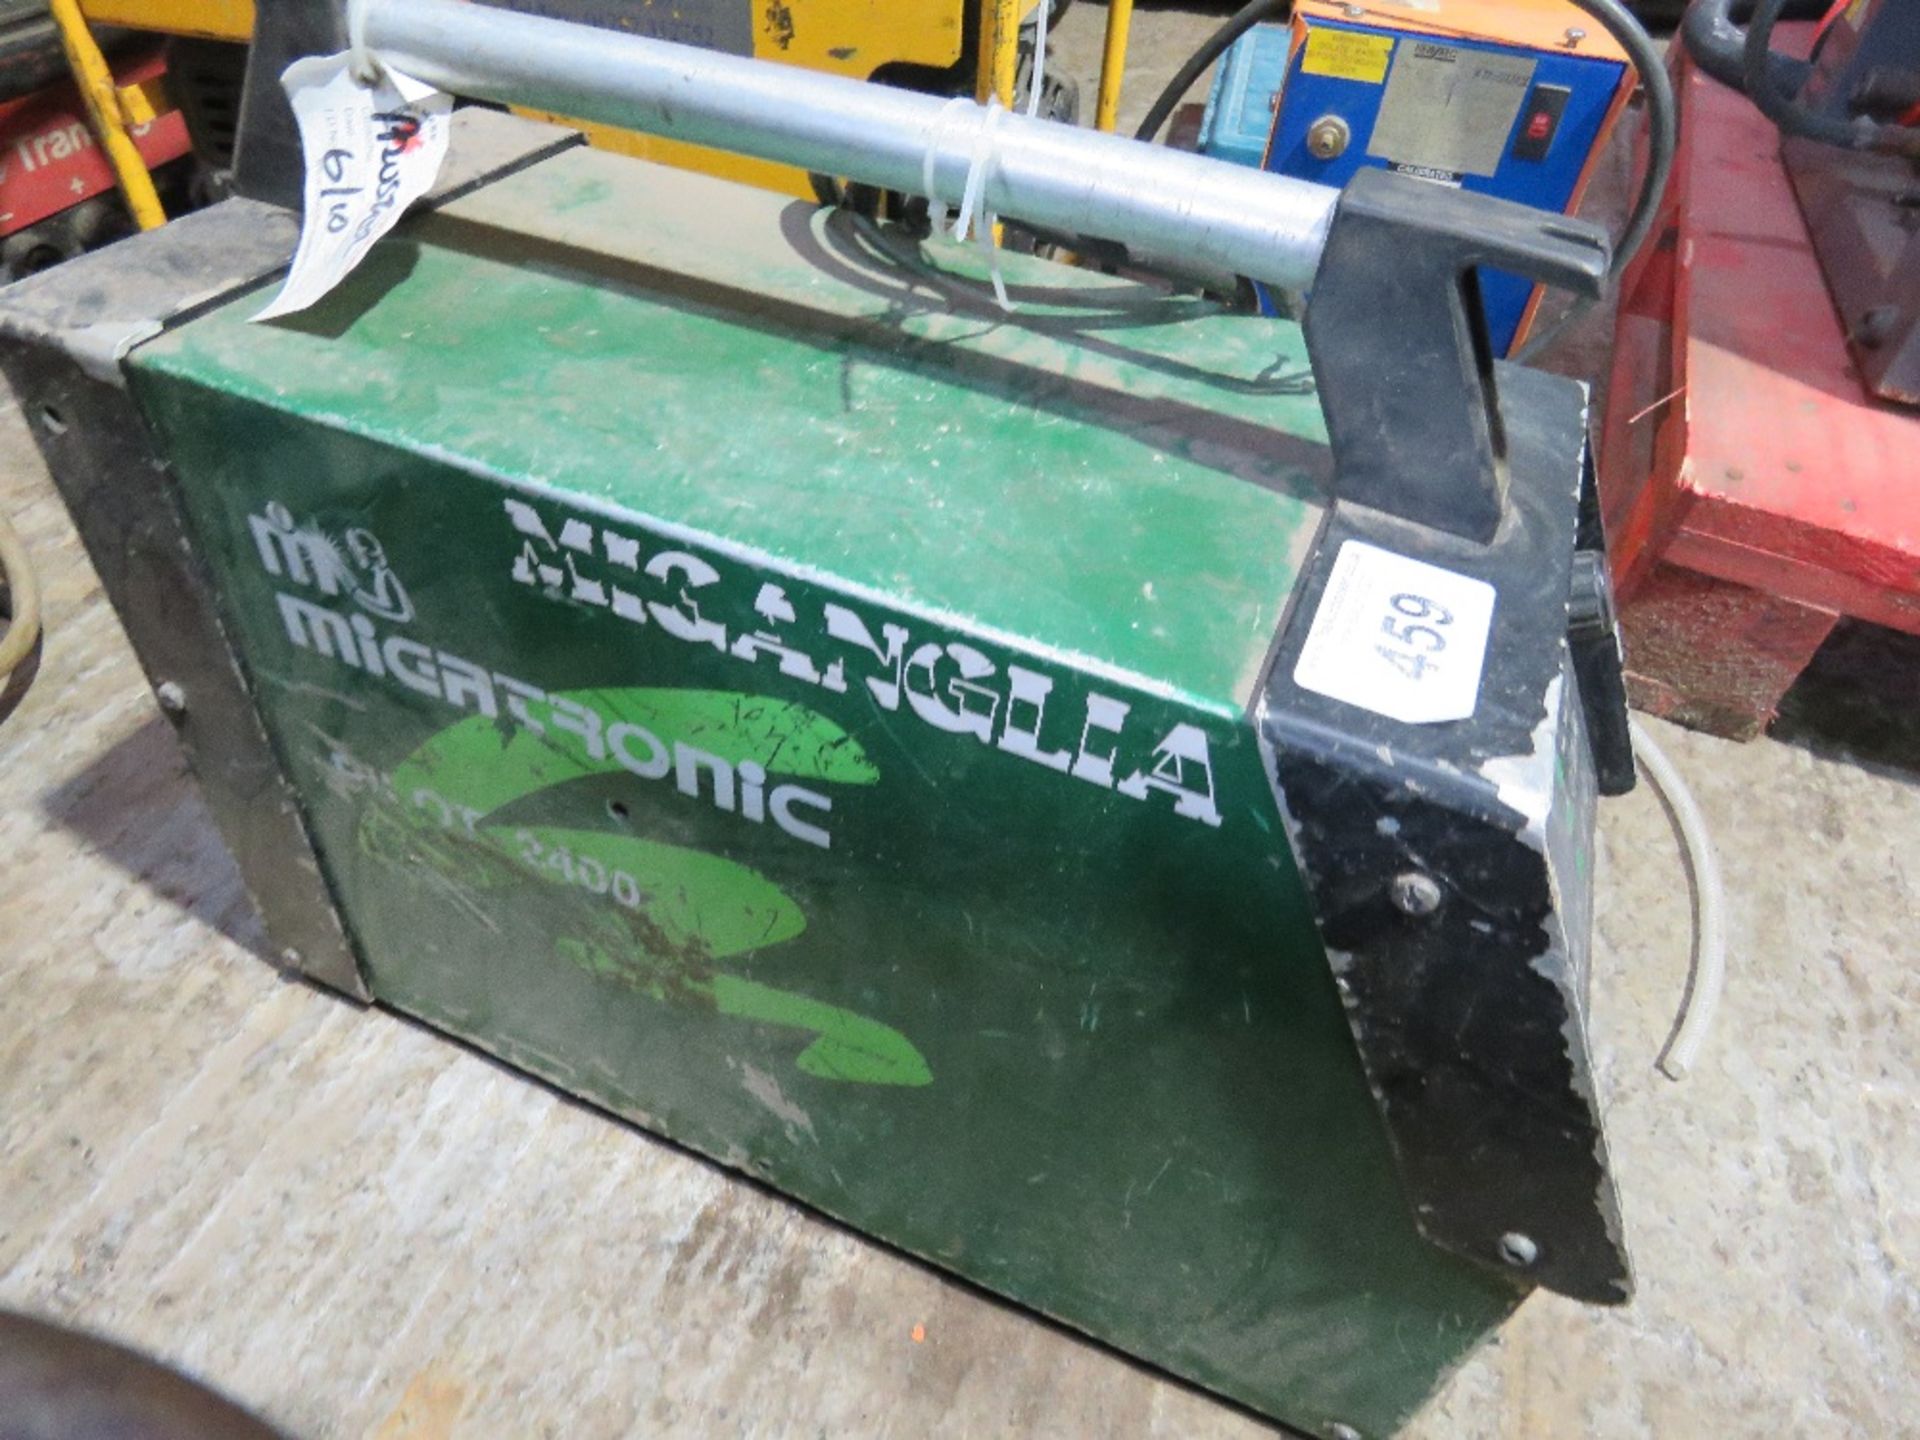 MIGATRONIC PILOT 2400 3 PHASE WELDER. DIRECT FROM LOCAL COMPANY. SURPLUS TO REQUIREMENTS. - Image 3 of 5